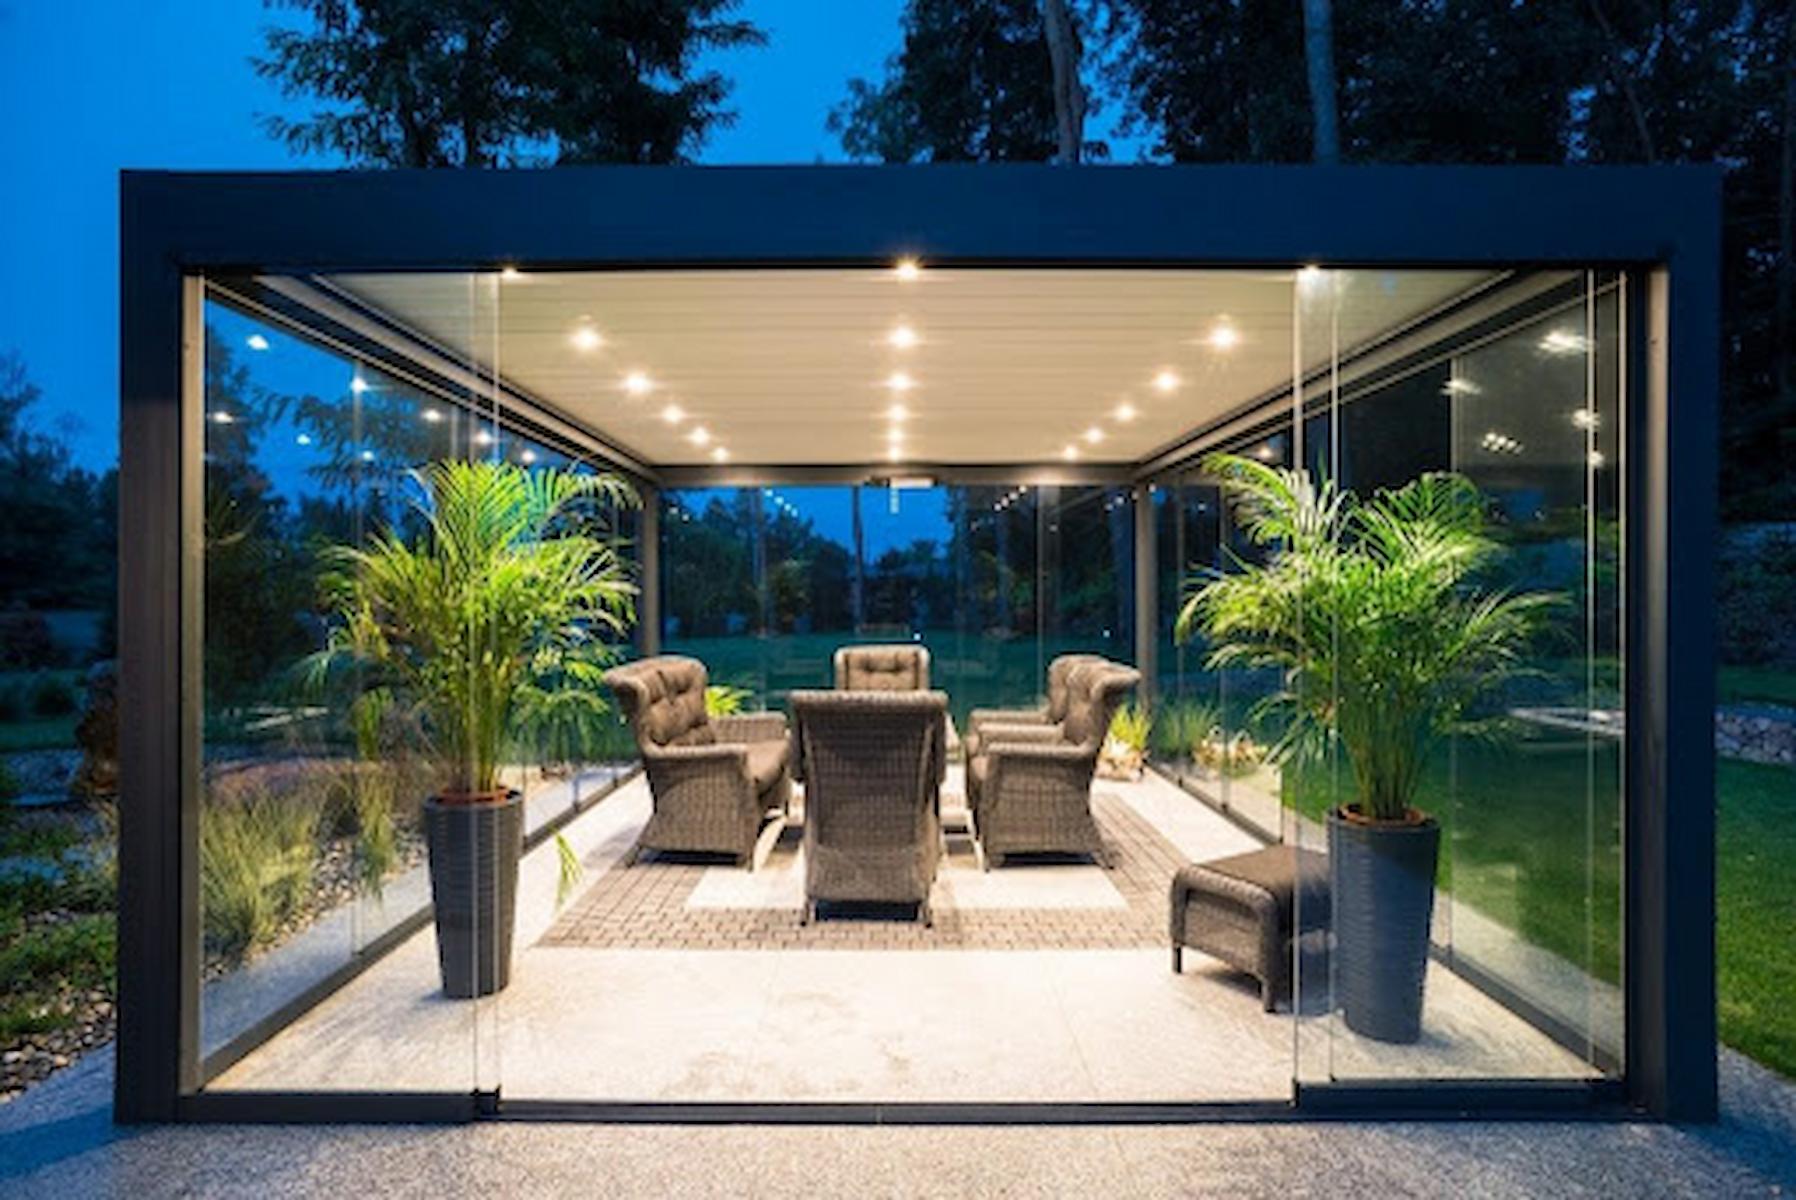 Top 4 Tips to Choose the Perfect Pergola for Your Outdoor Space